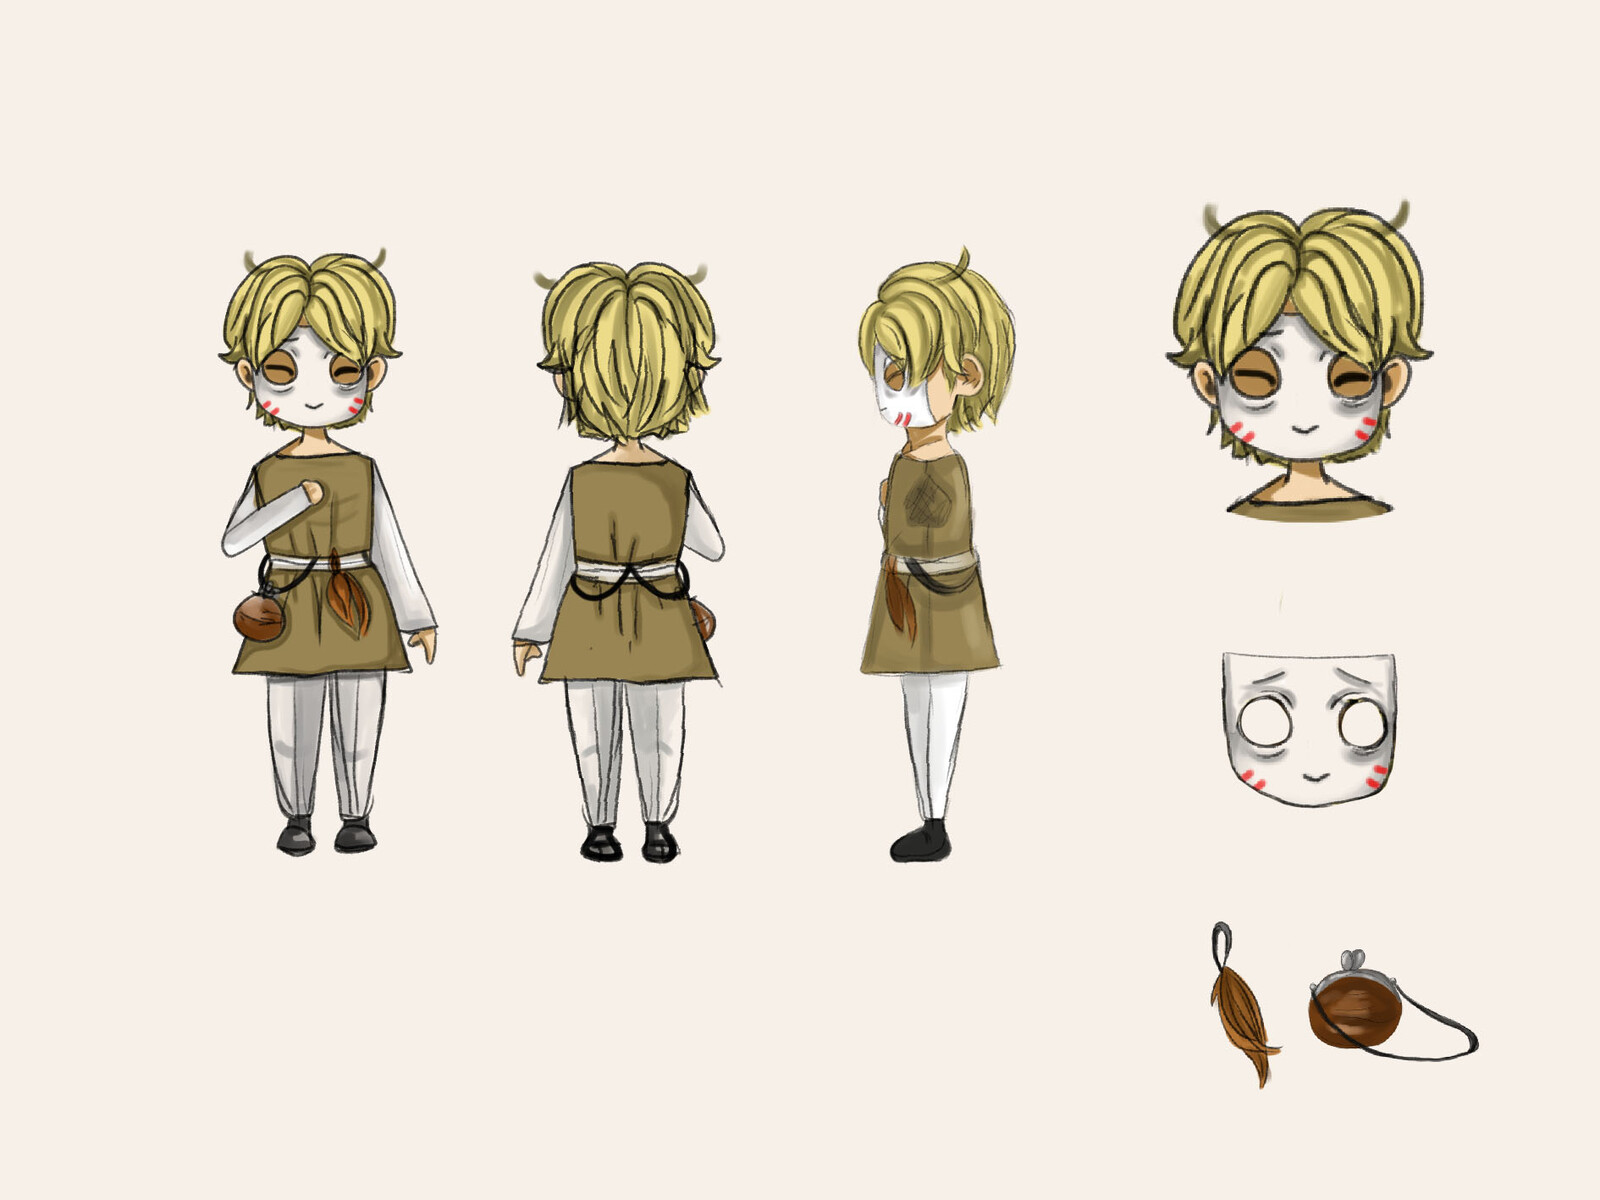 The shop keeper character design